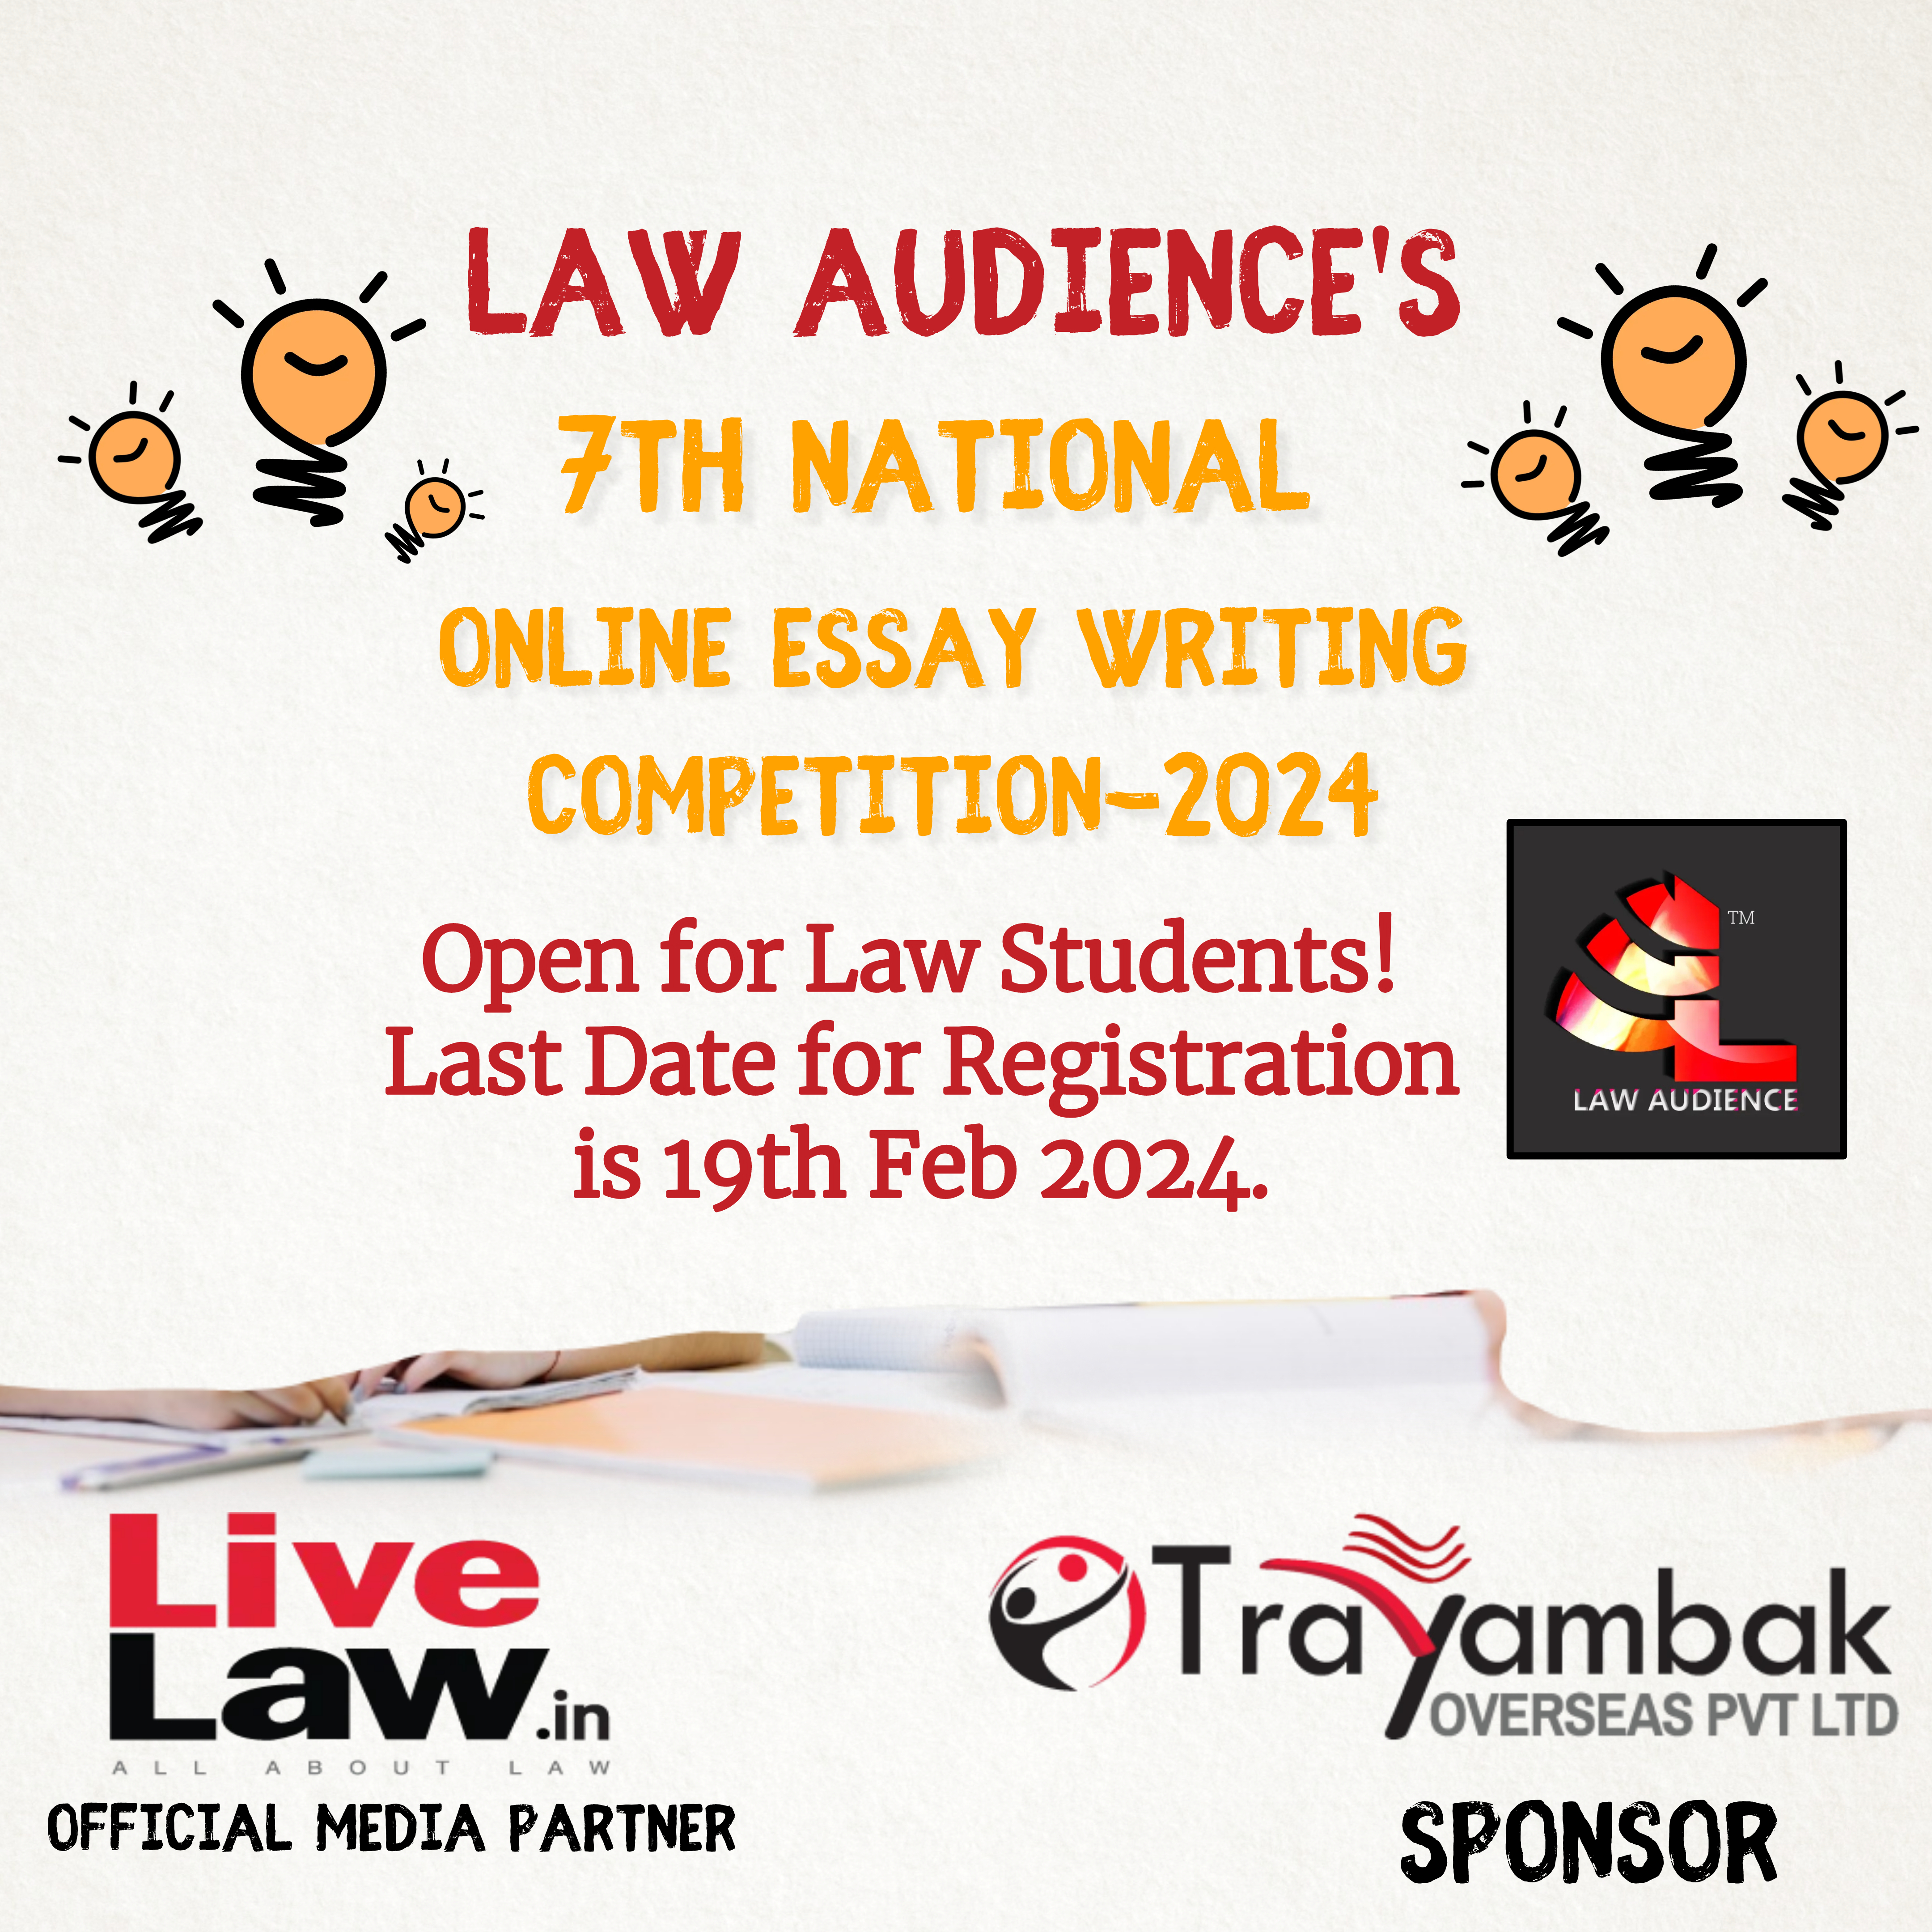 You are currently viewing Results: Law Audience’s 7th National Online Essay Writing Competition-2024